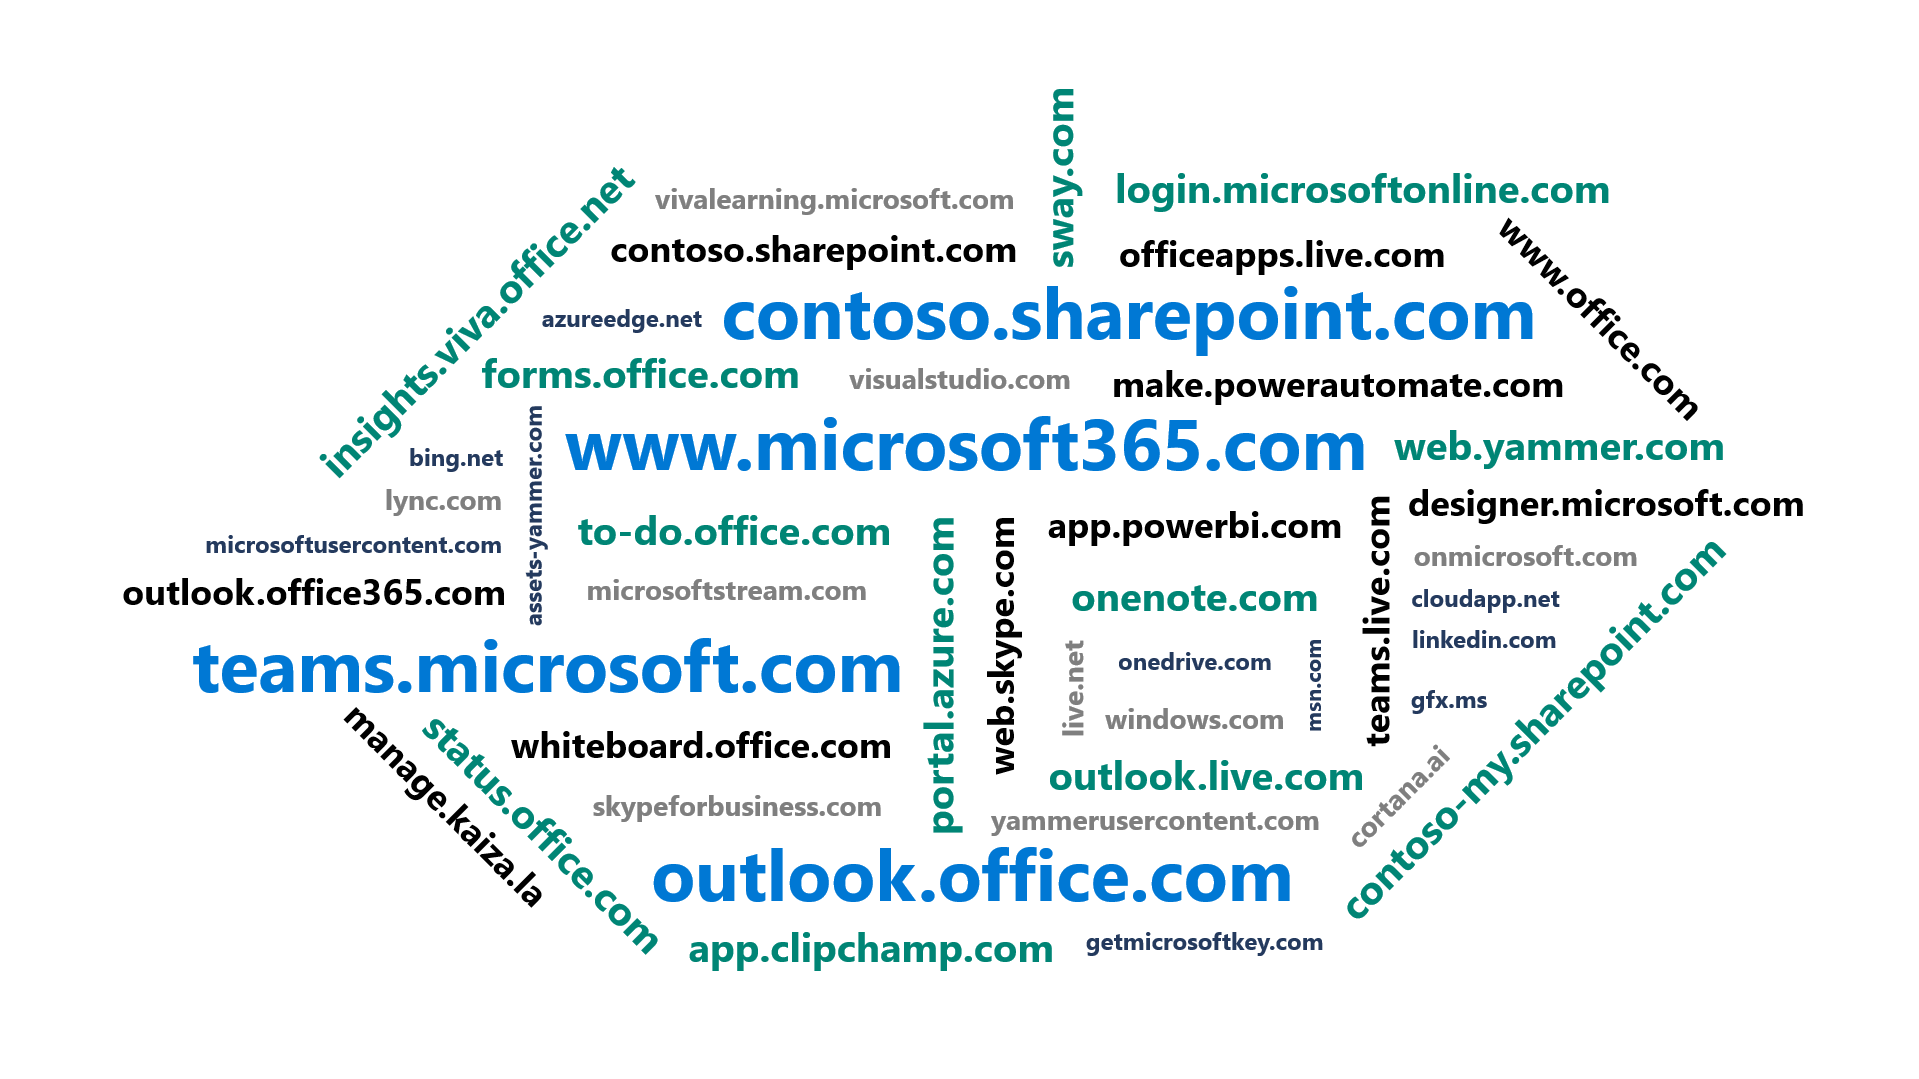 Introducing : a unified domain for Microsoft 365 apps and  services - Microsoft Community Hub